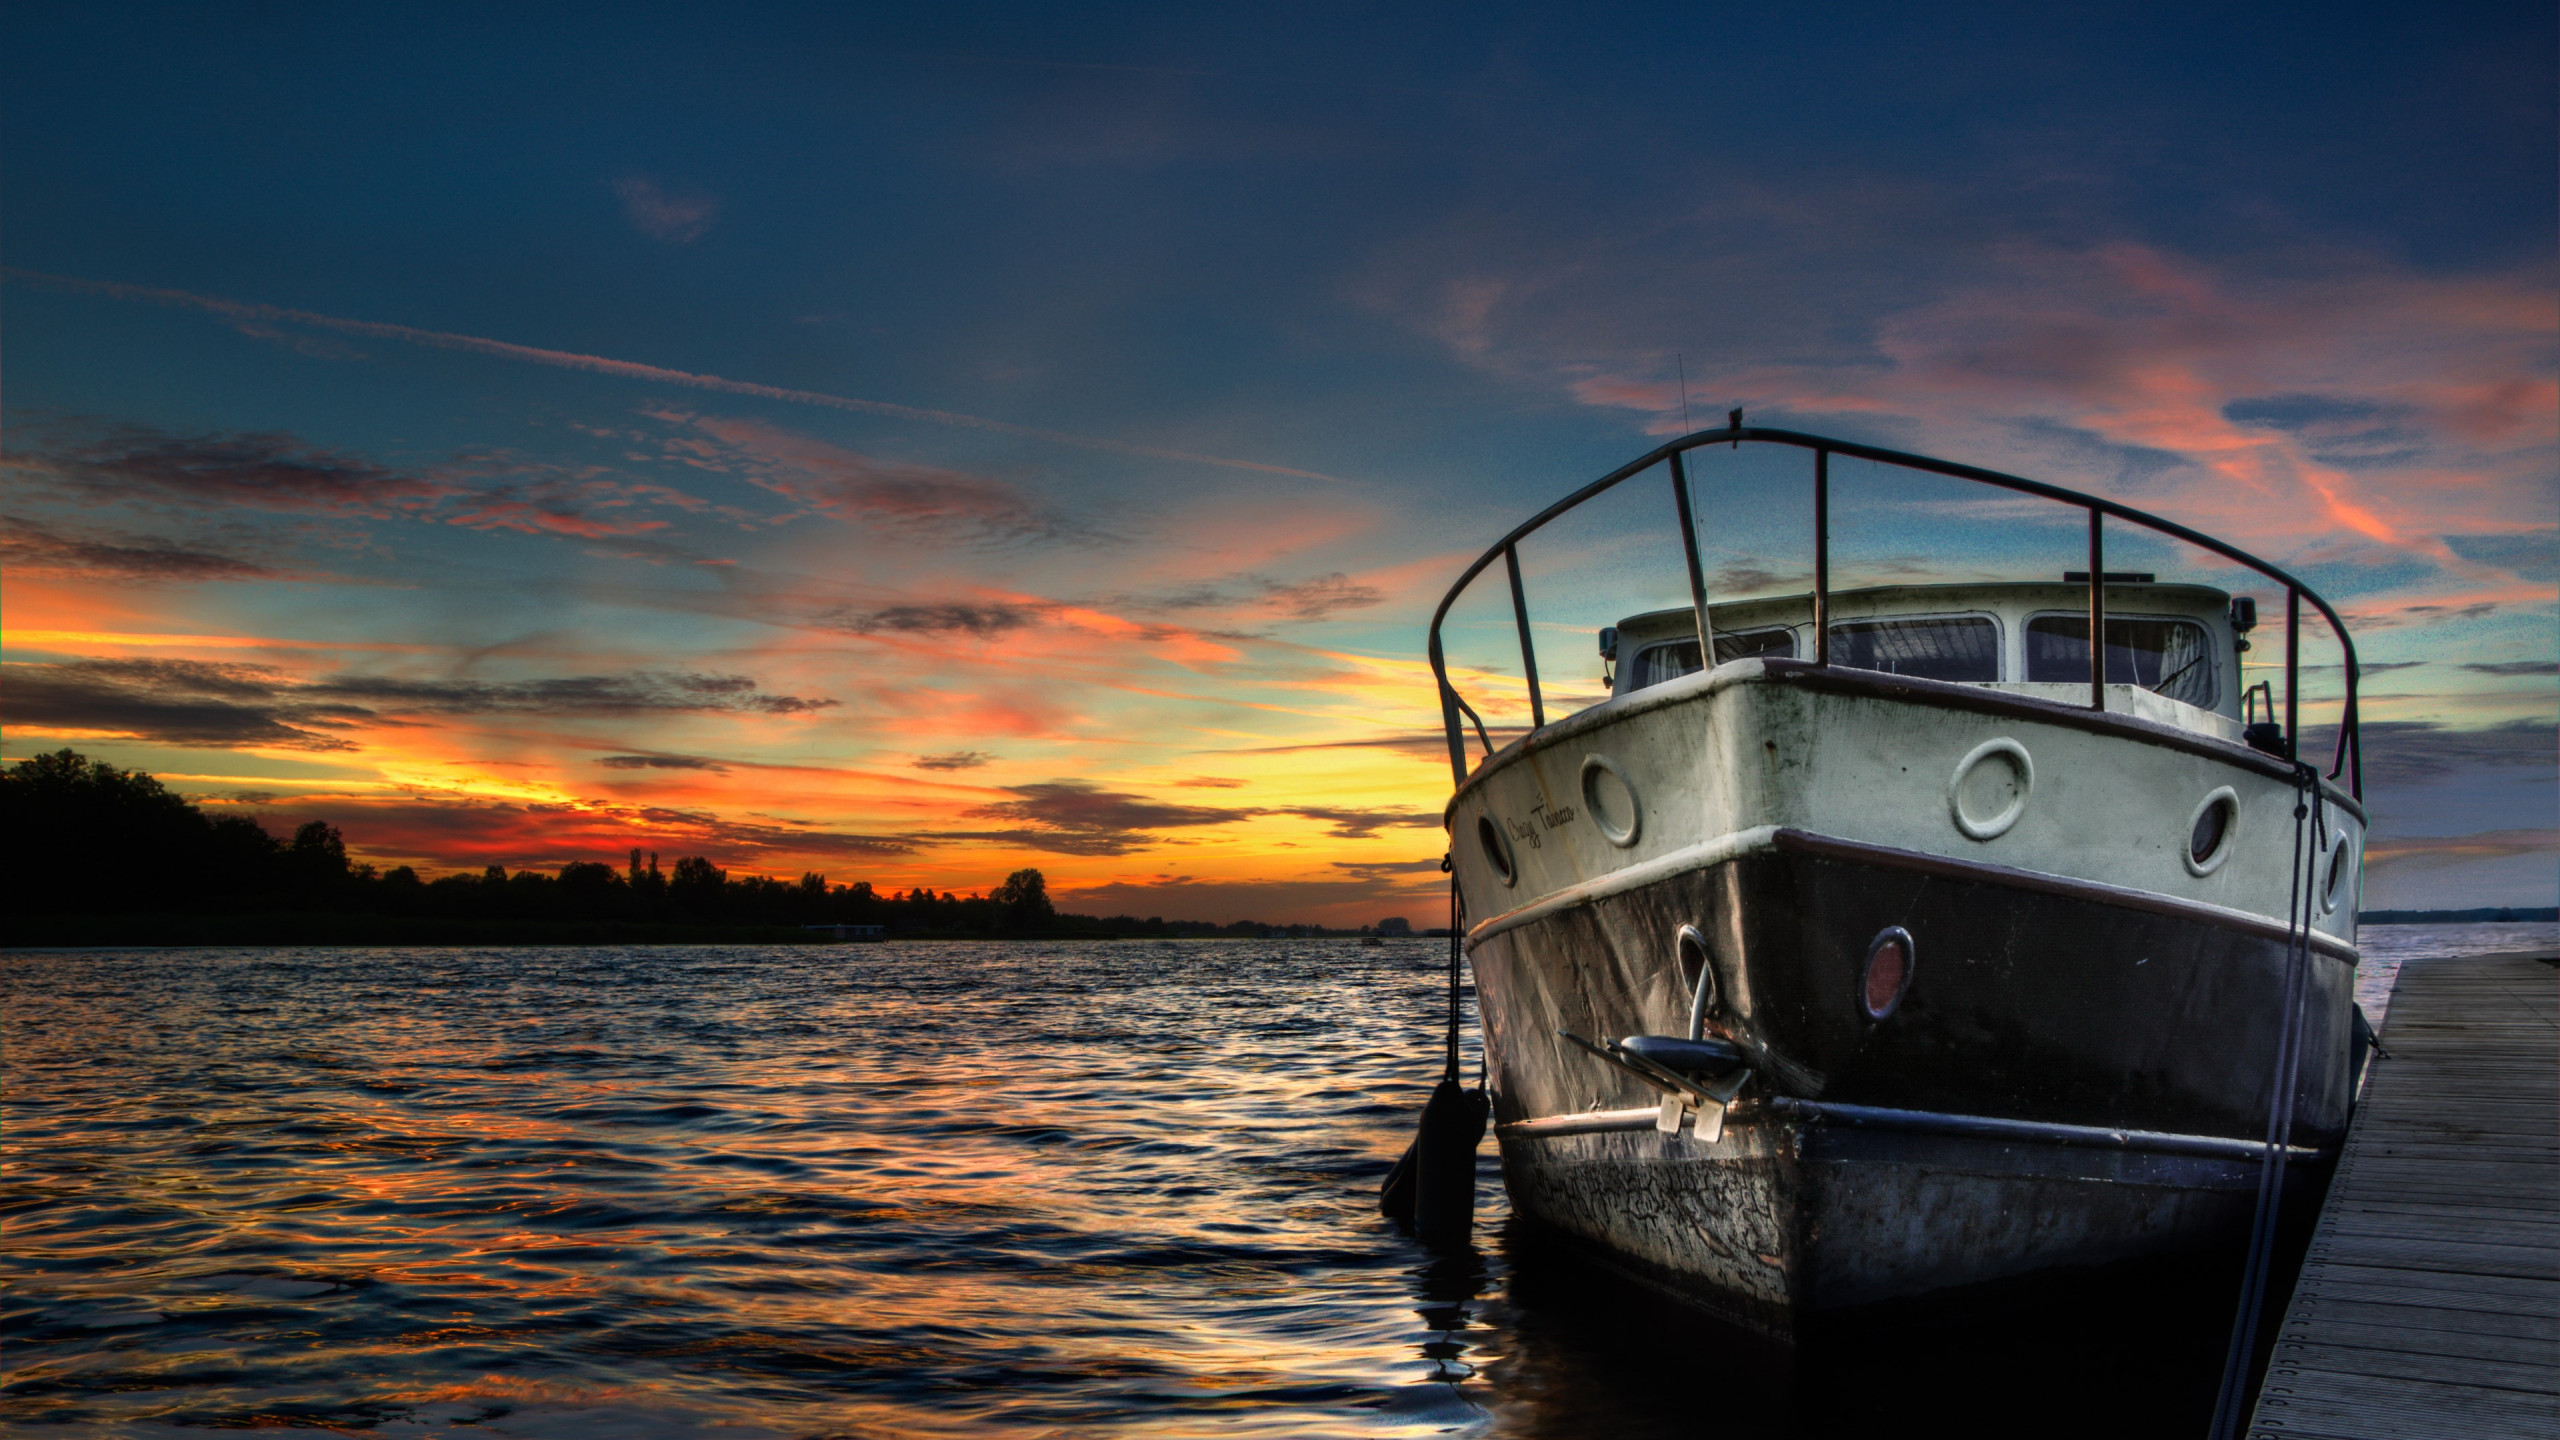 Boat and sunset in background wallpaper 2560x1440